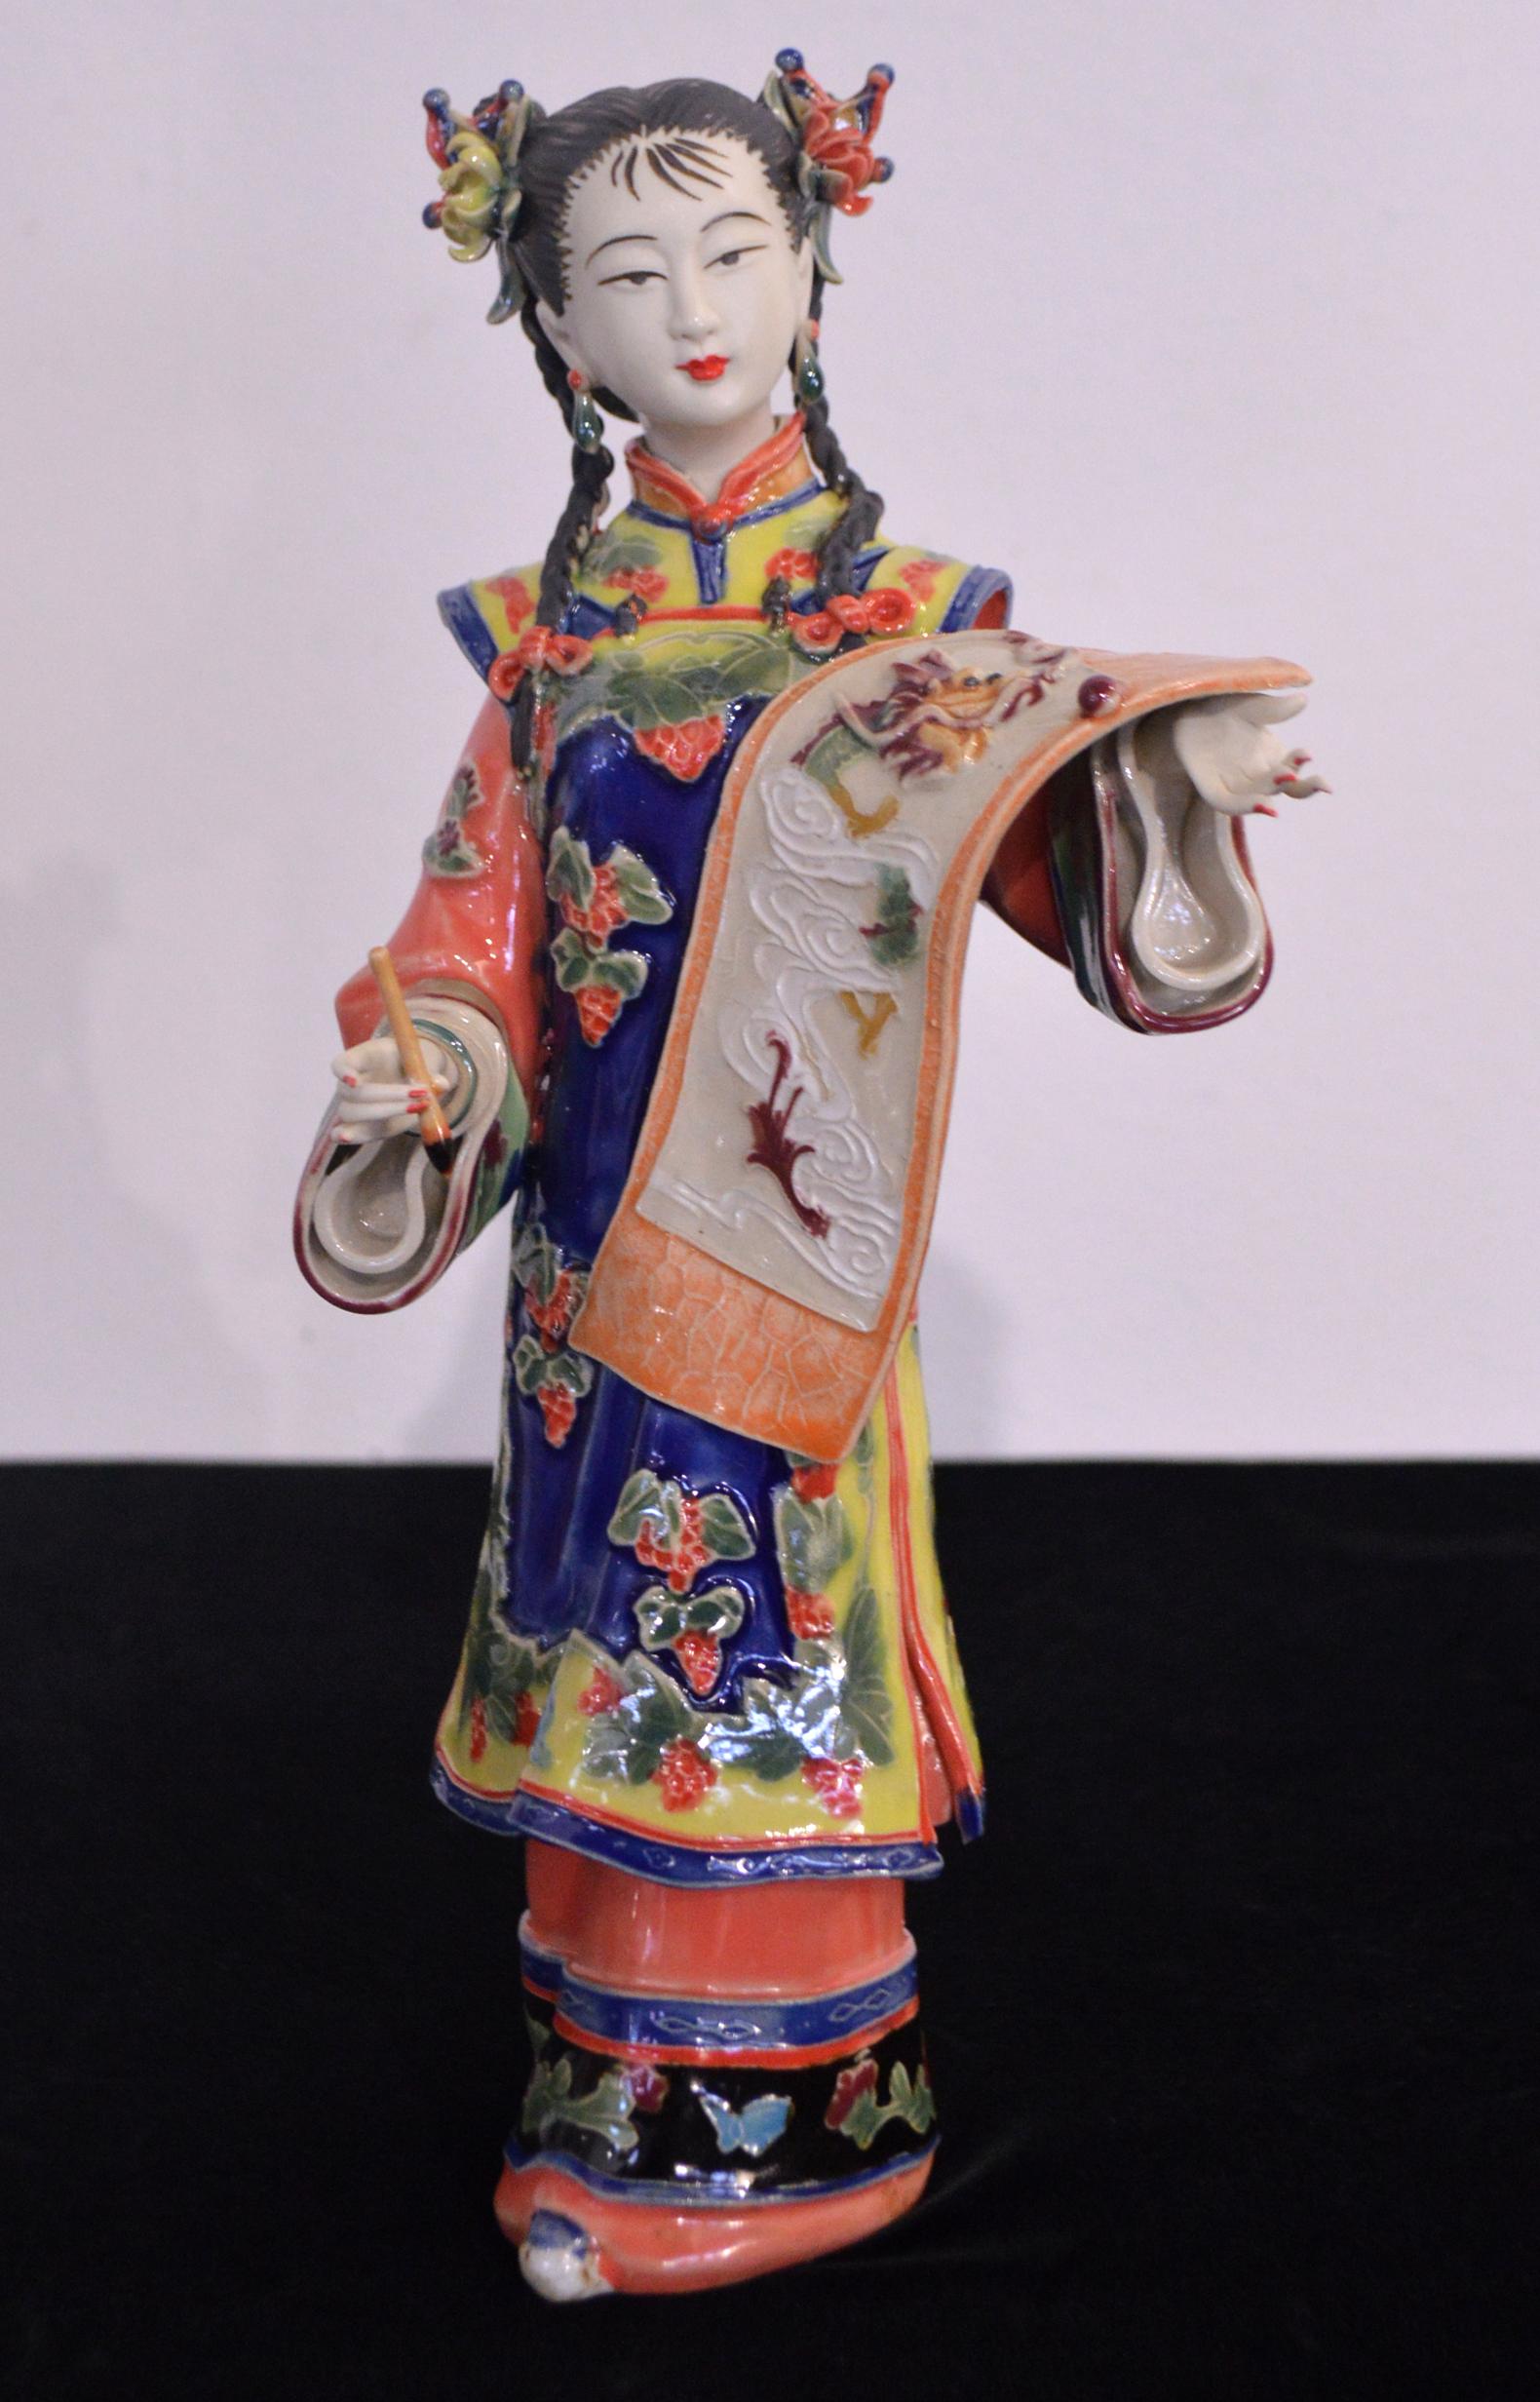 This 21st century Chinese ceramic craft production represents a graceful young woman, probably a court lady, painting a dragon. The typical roll is resting on her arms, while the right hand, embellished with a movable bracelet, holds the brush.